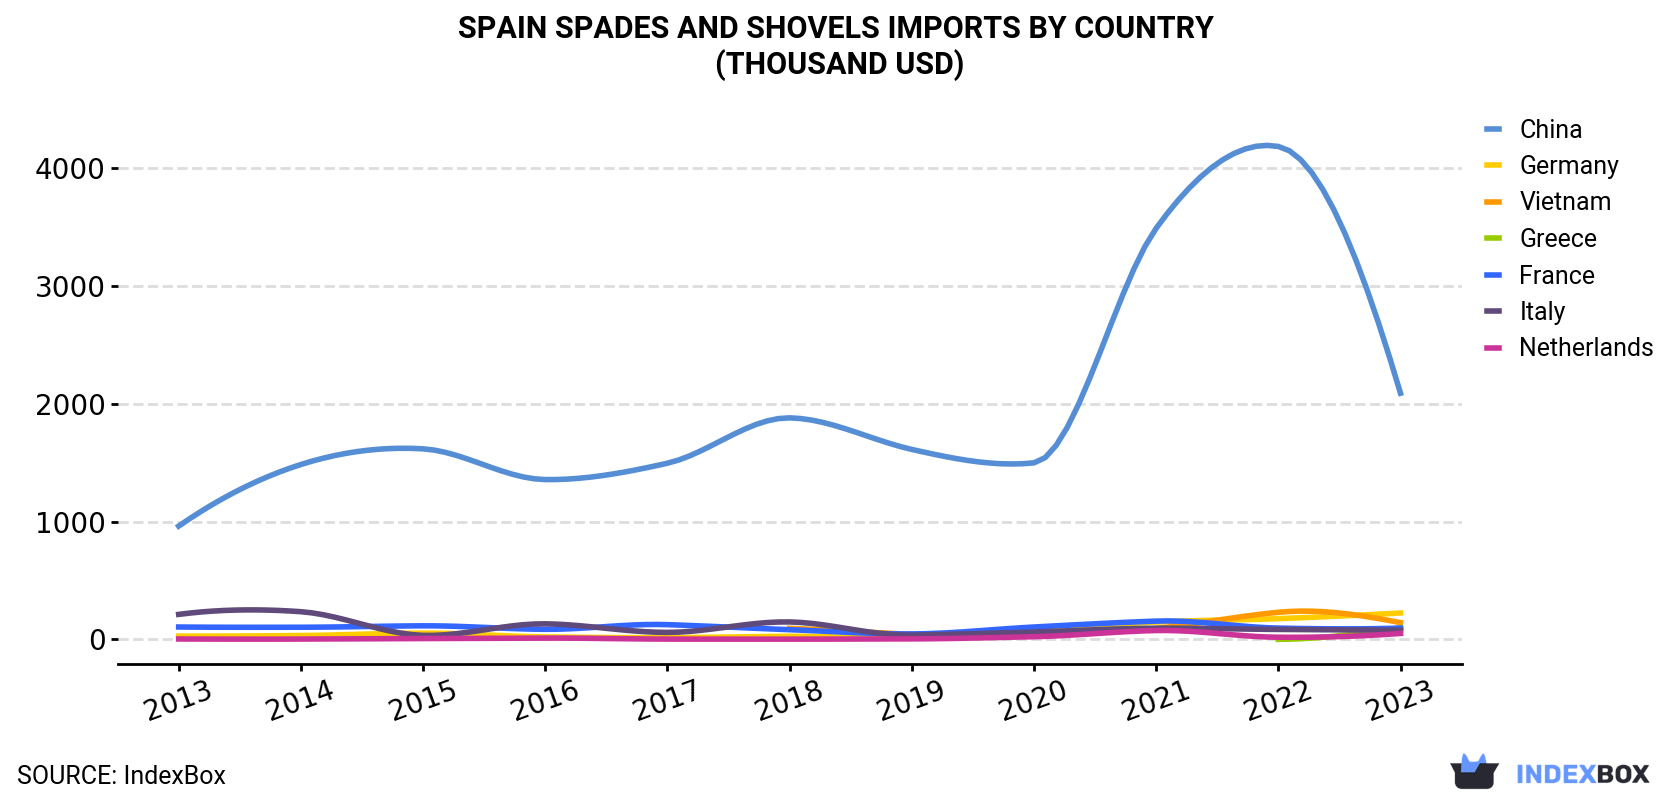 Spain Spades And Shovels Imports By Country (Thousand USD)